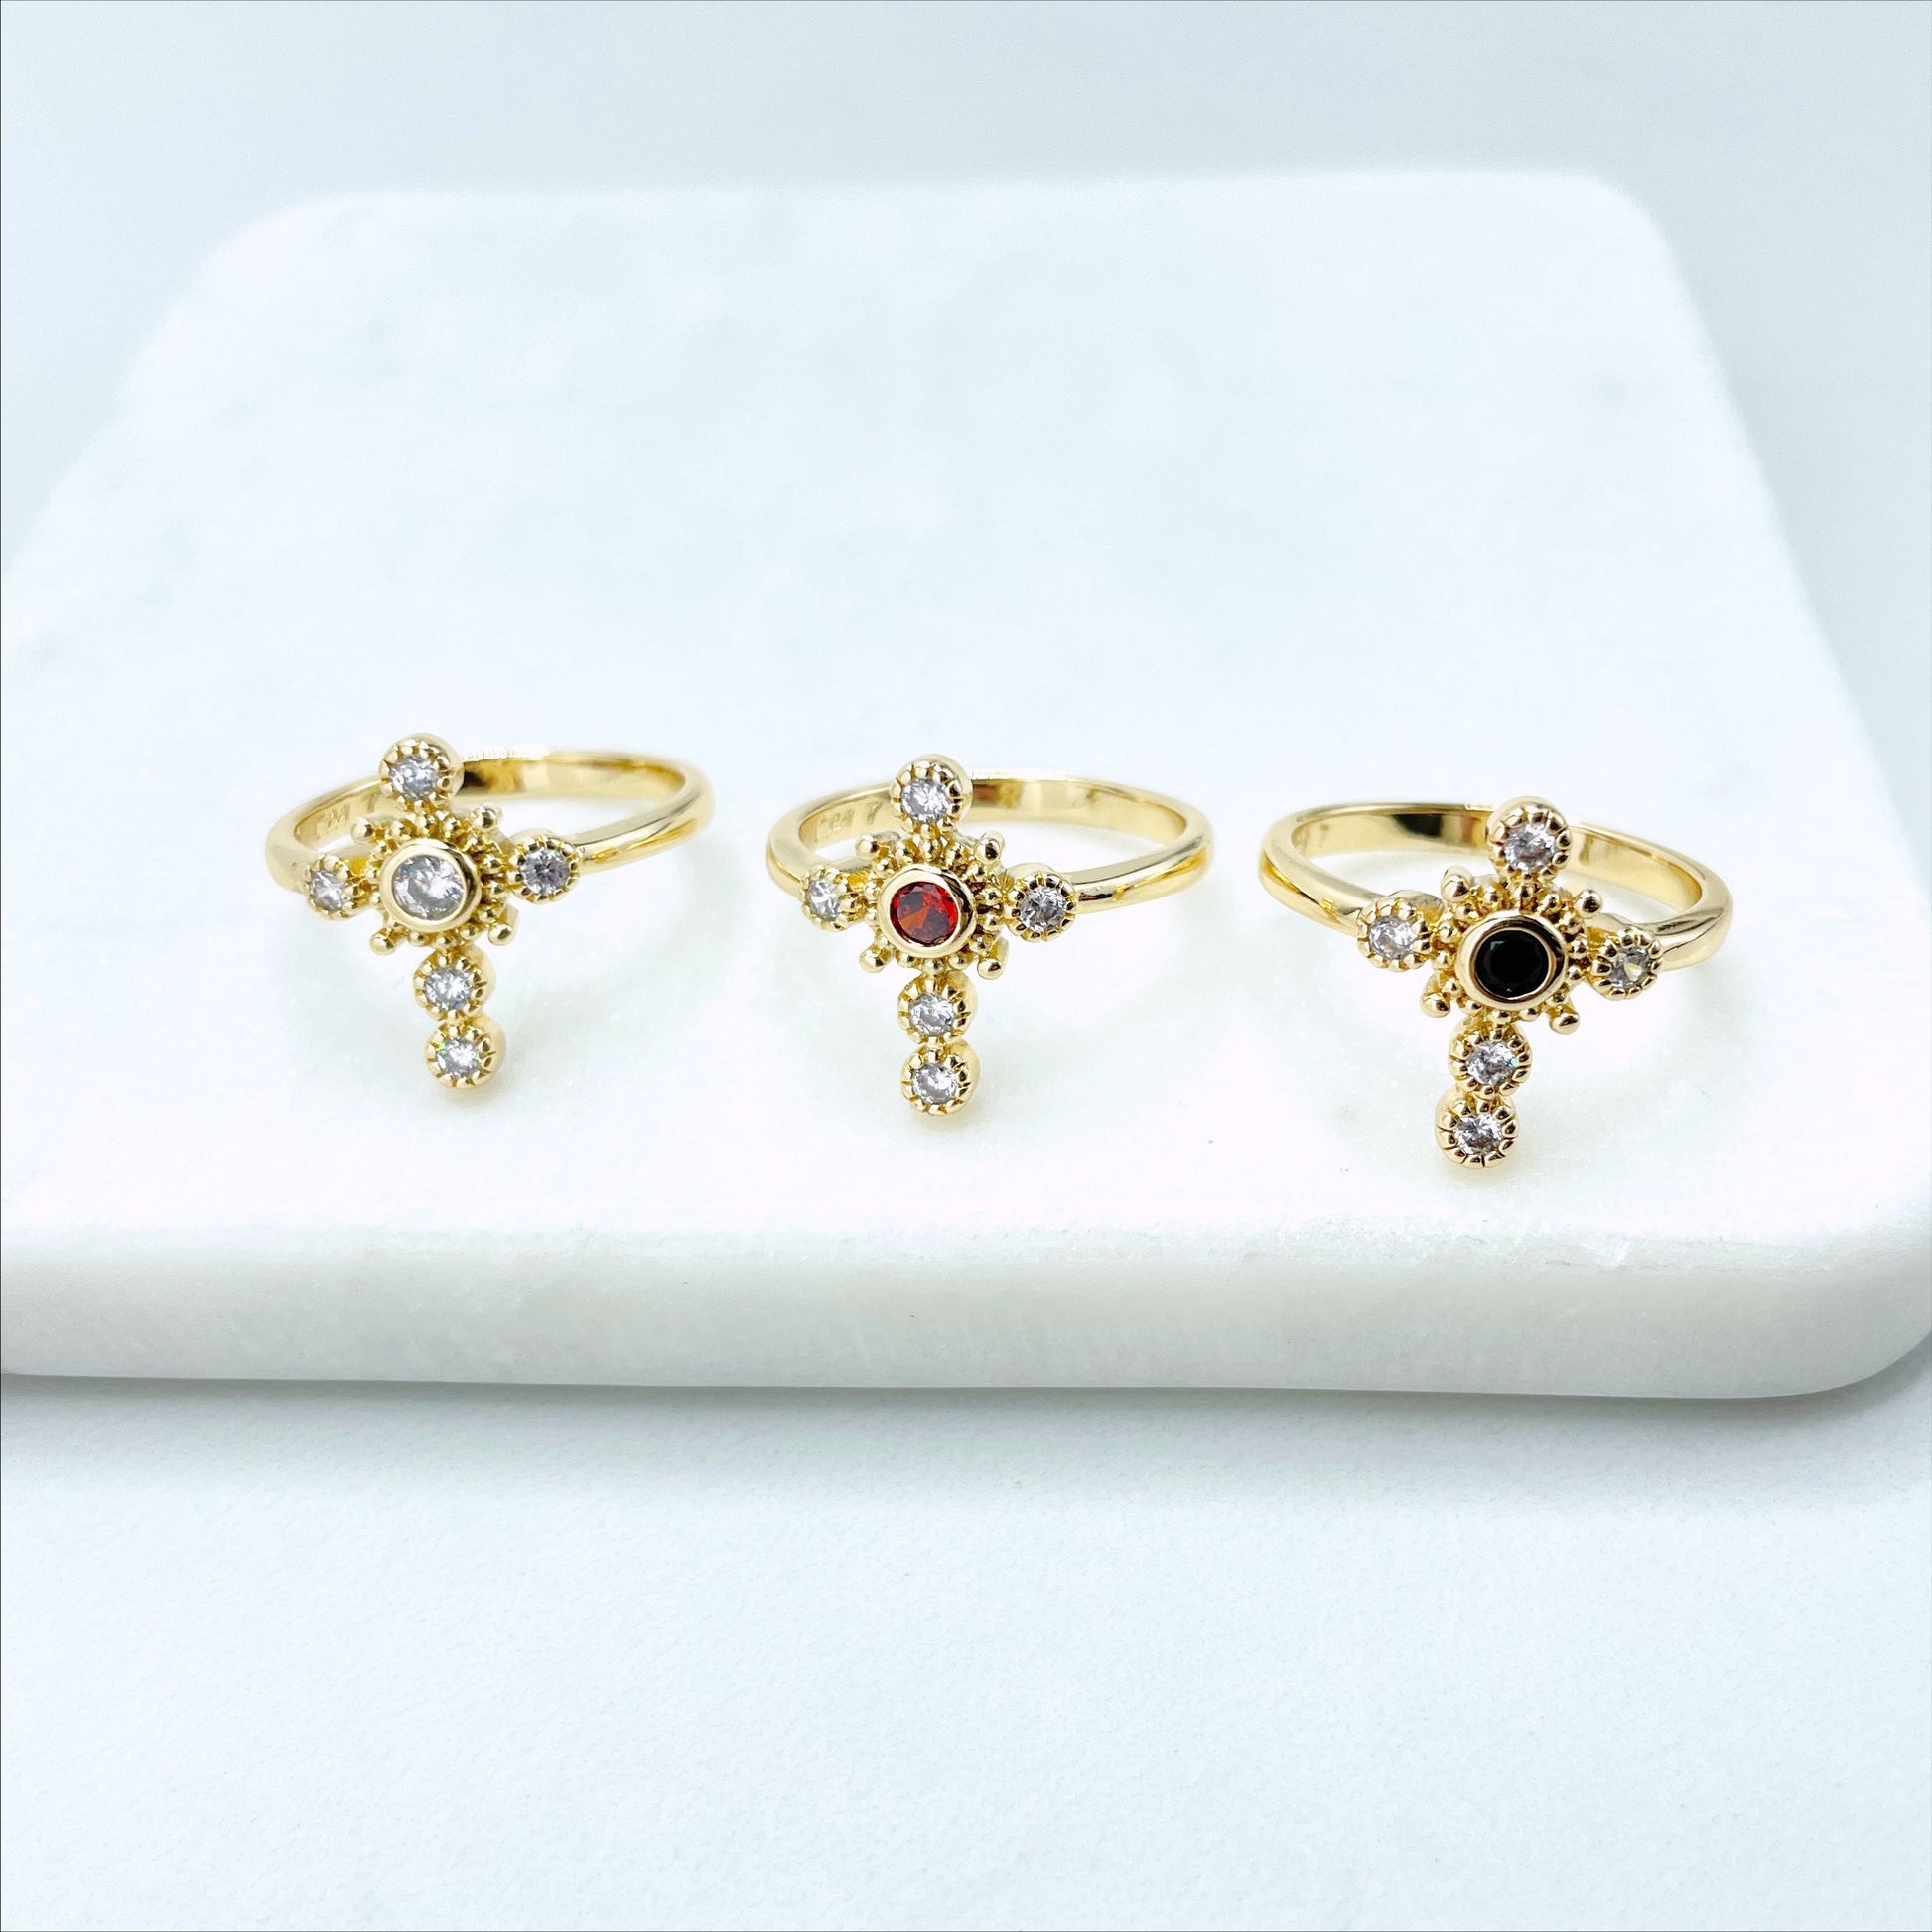 18k Gold Filled Deliciated Cross Shape Ring with Cubic Zirconia Red, White or Black, Wholesale Jewelry Making Supplies